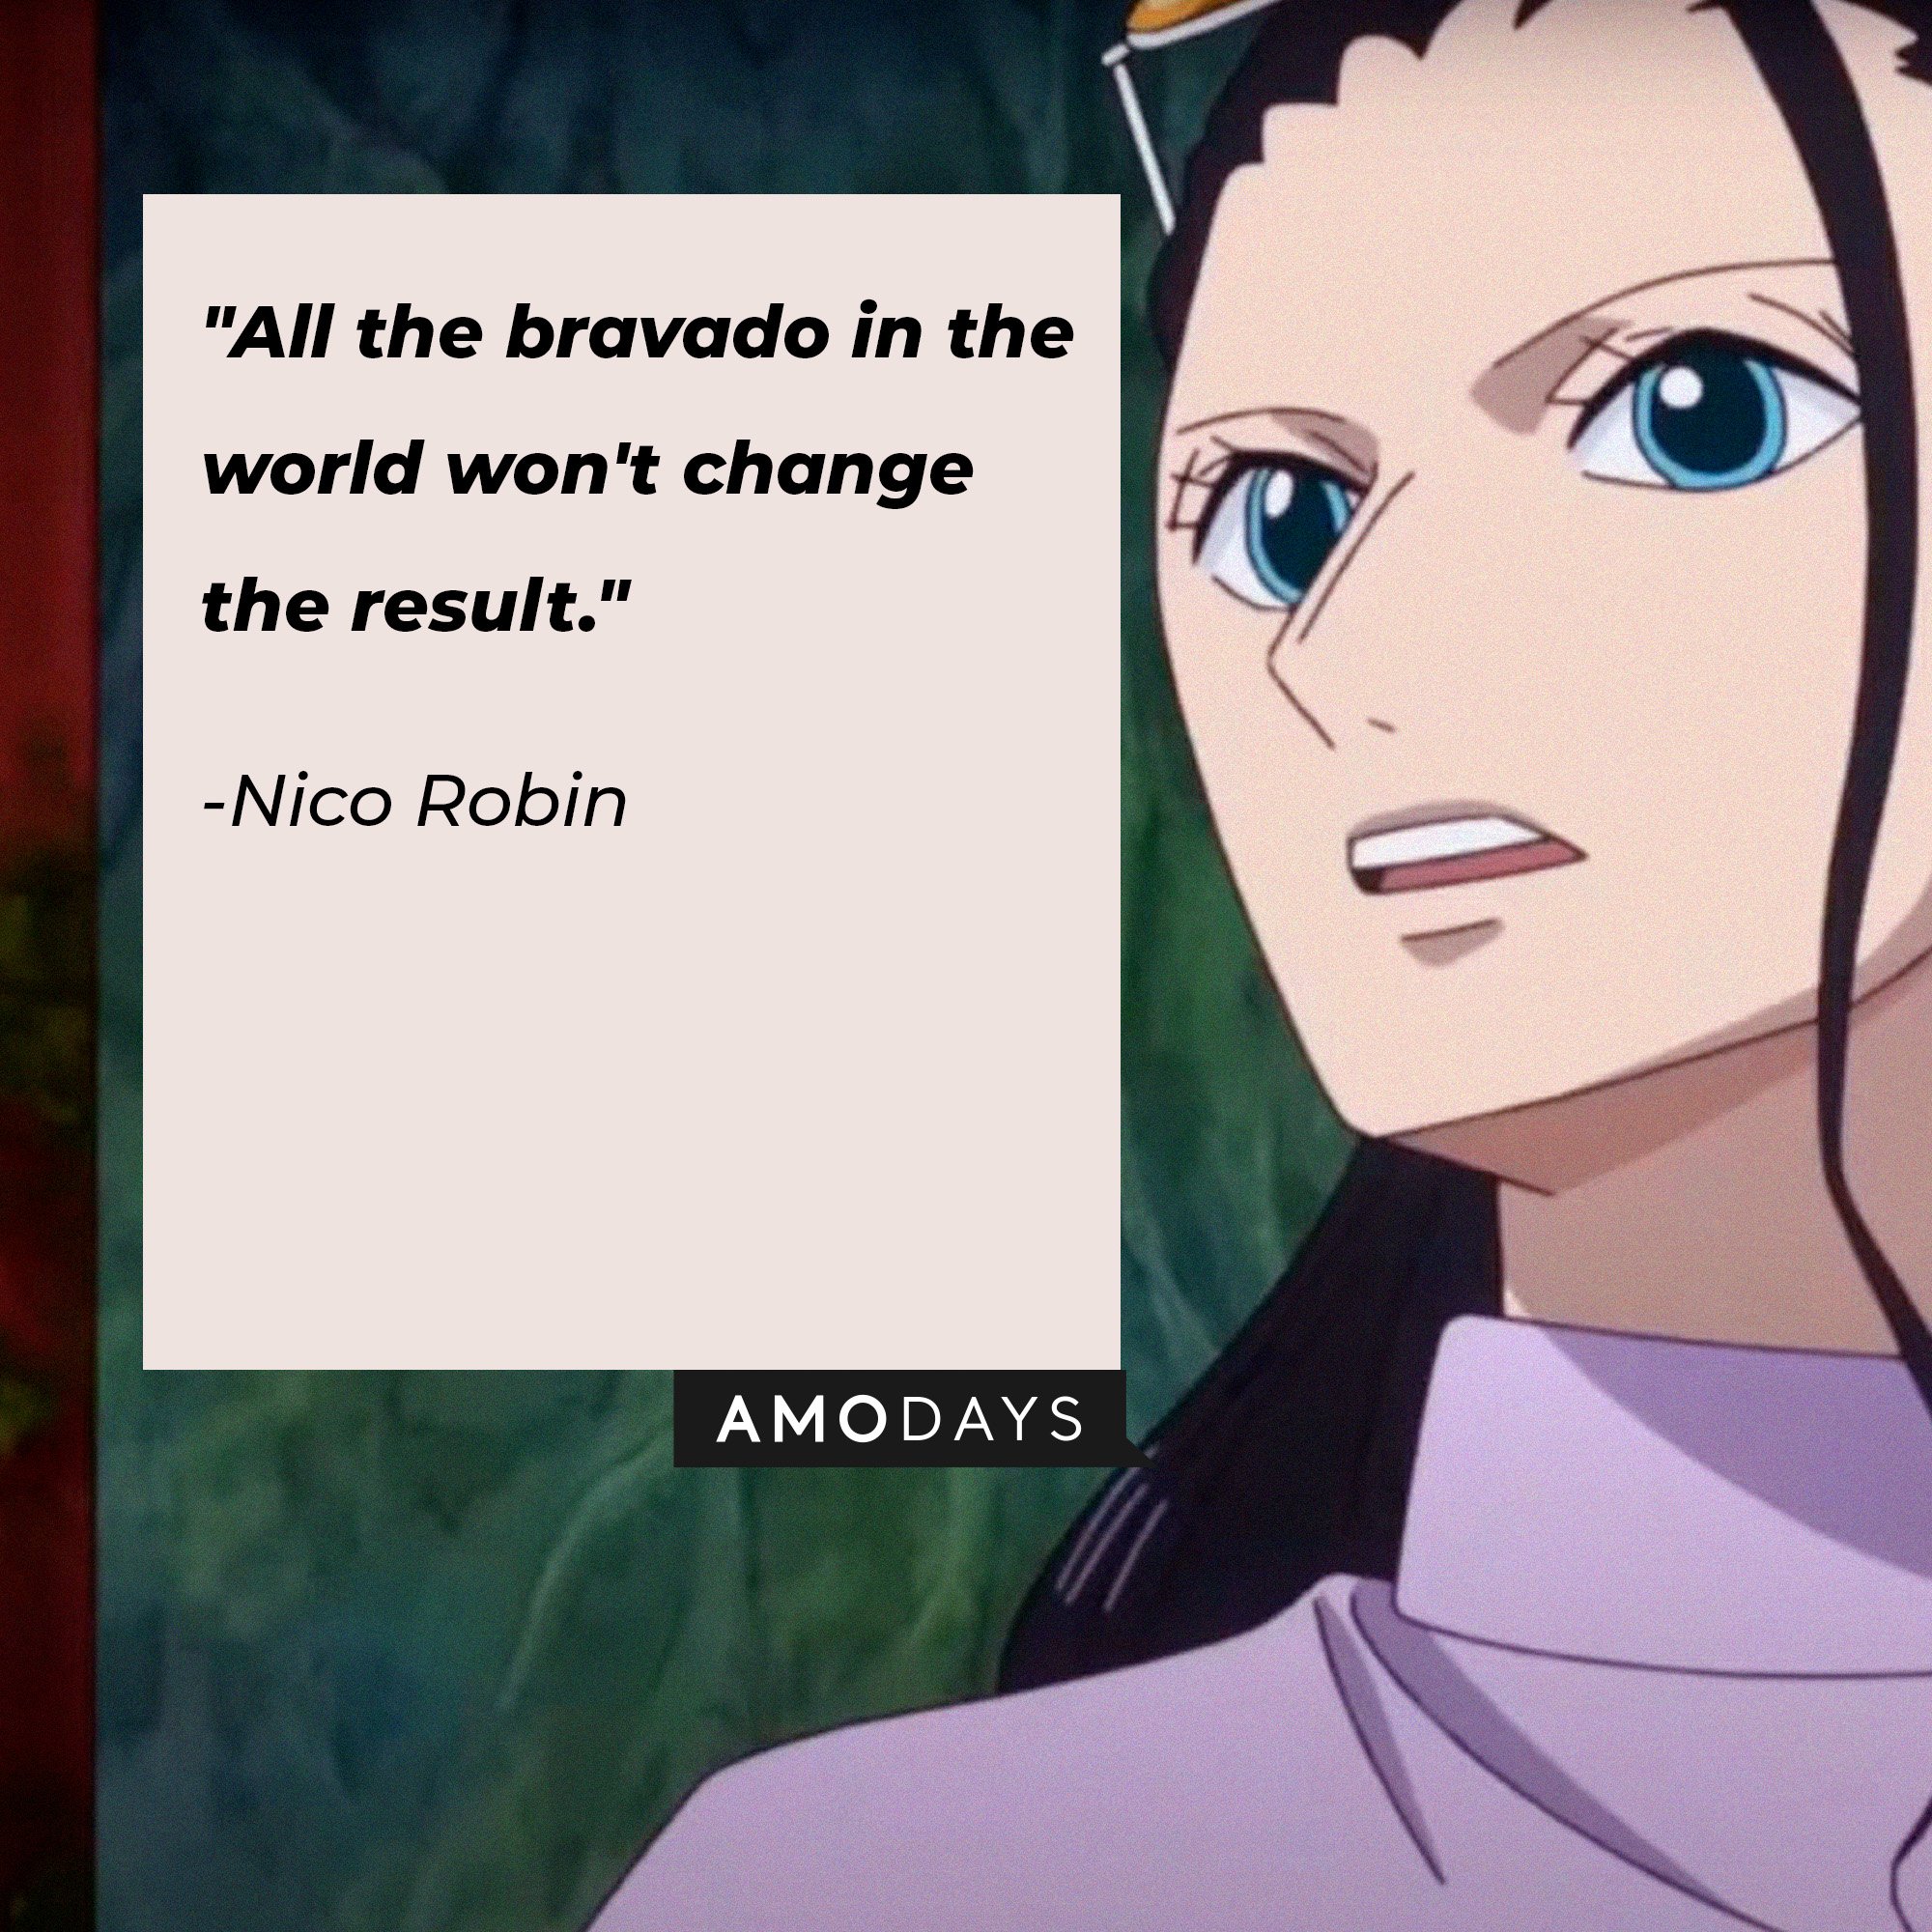 Nico Robin’s quote: "All the bravado in the world won't change the result."  | Image: AmoDays